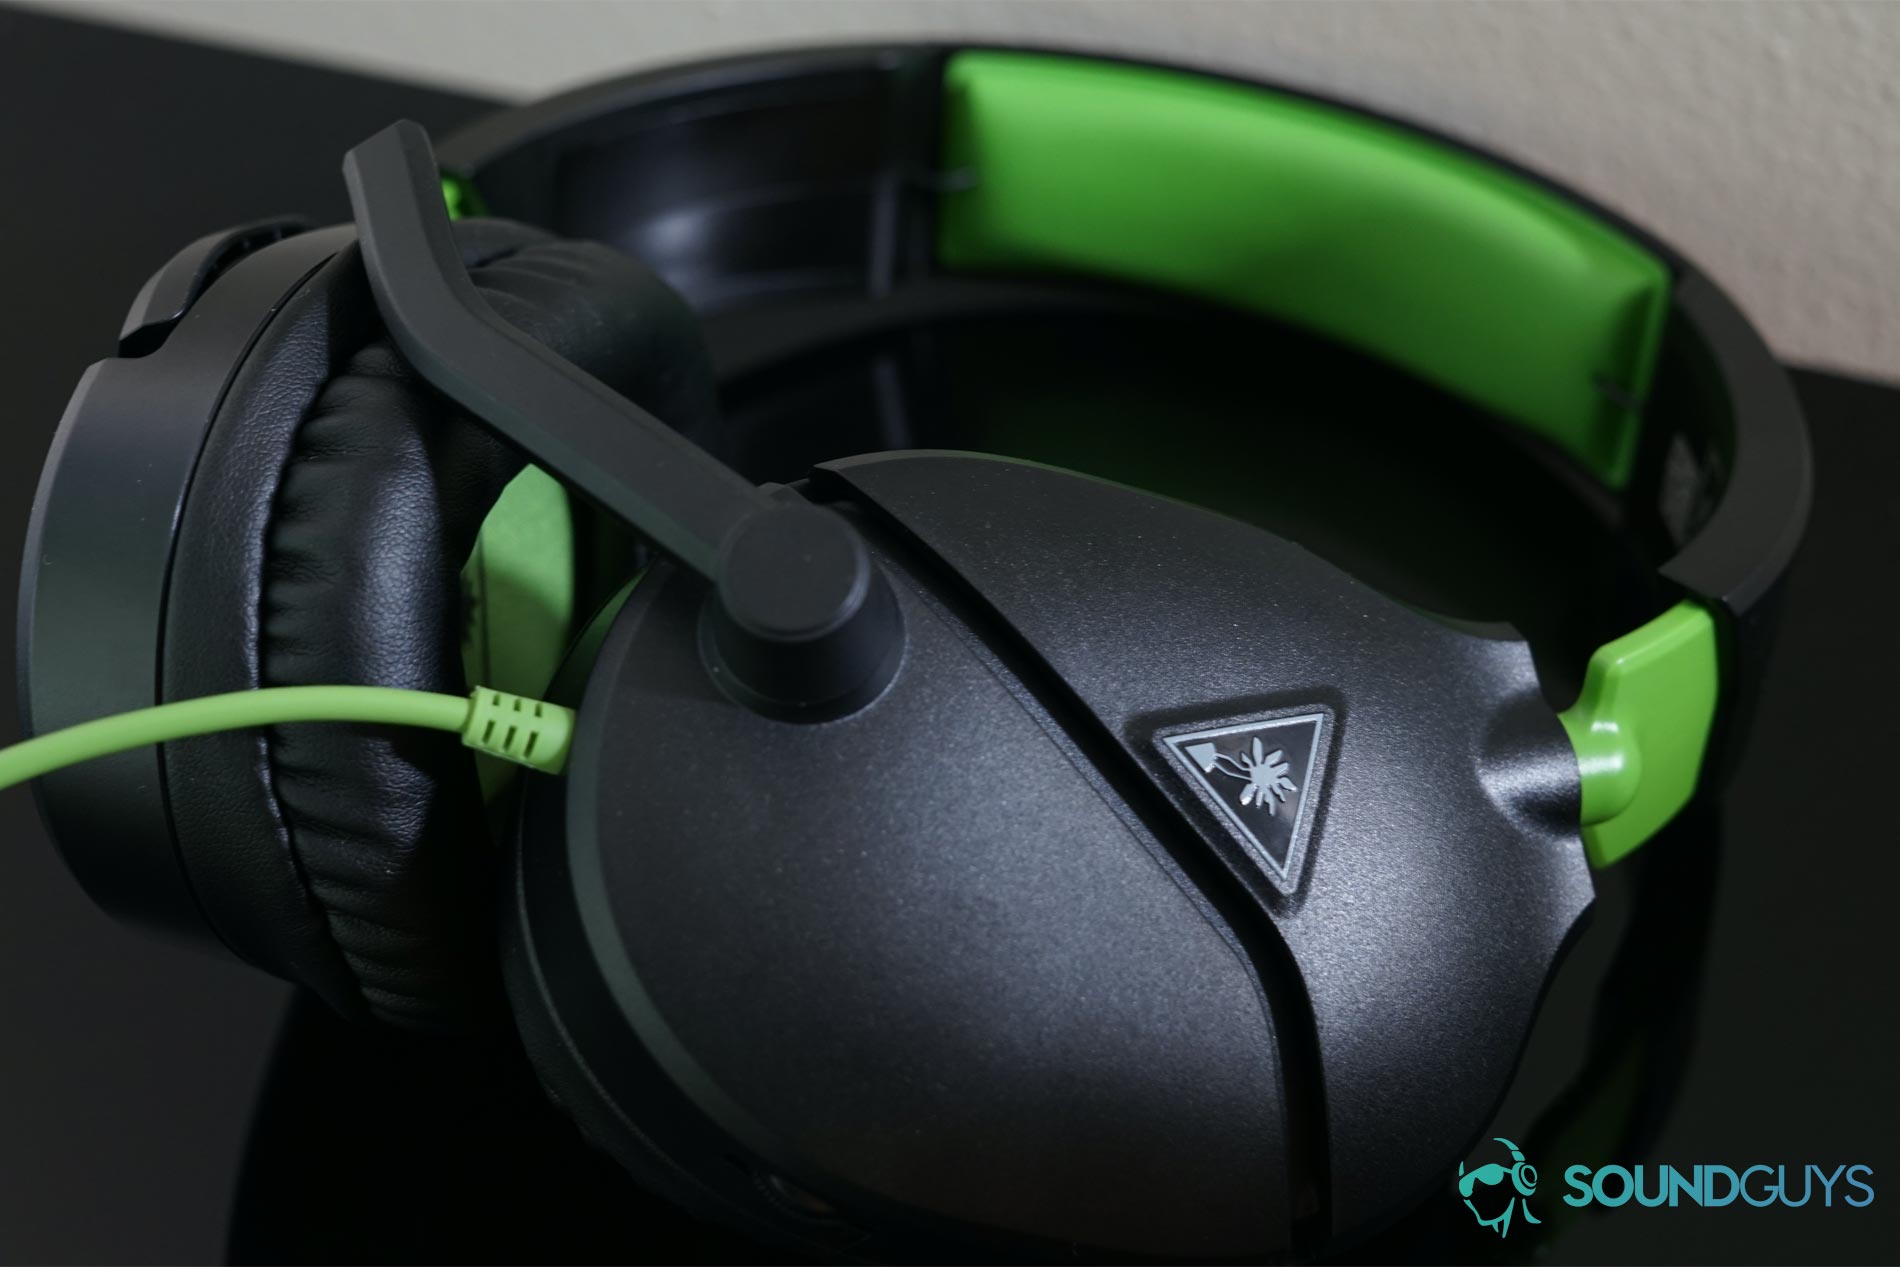 The Turtle Beach Recon 70 gaming headset ear cup and microphone.